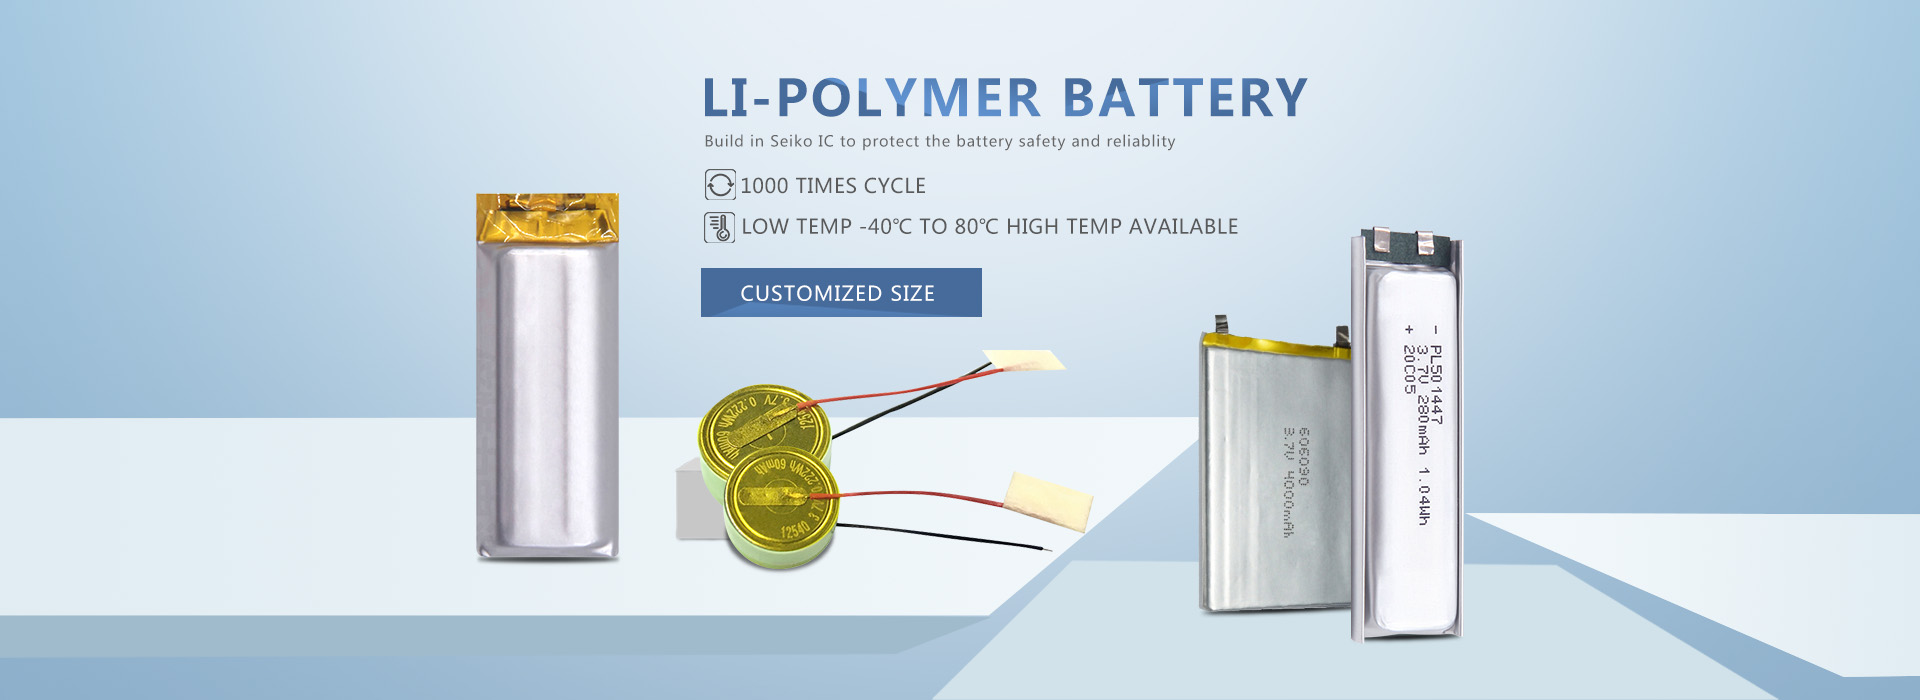 Lithium-ion Polymer (LiPo) Battery Manufacturer